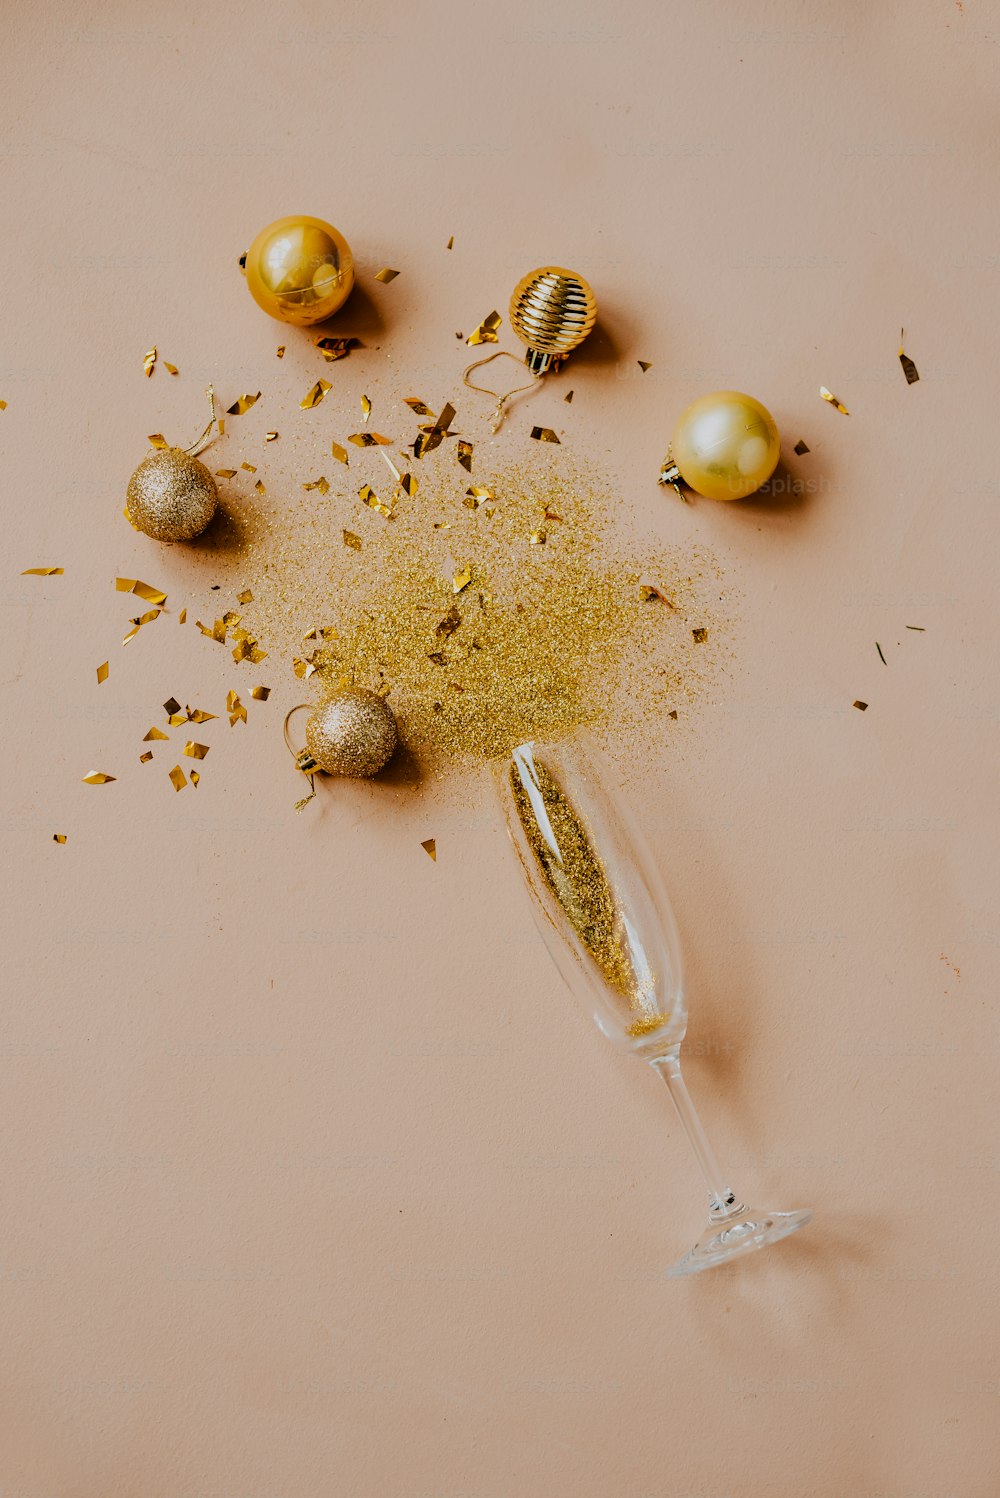 a glass filled with gold glitter next to some eggs